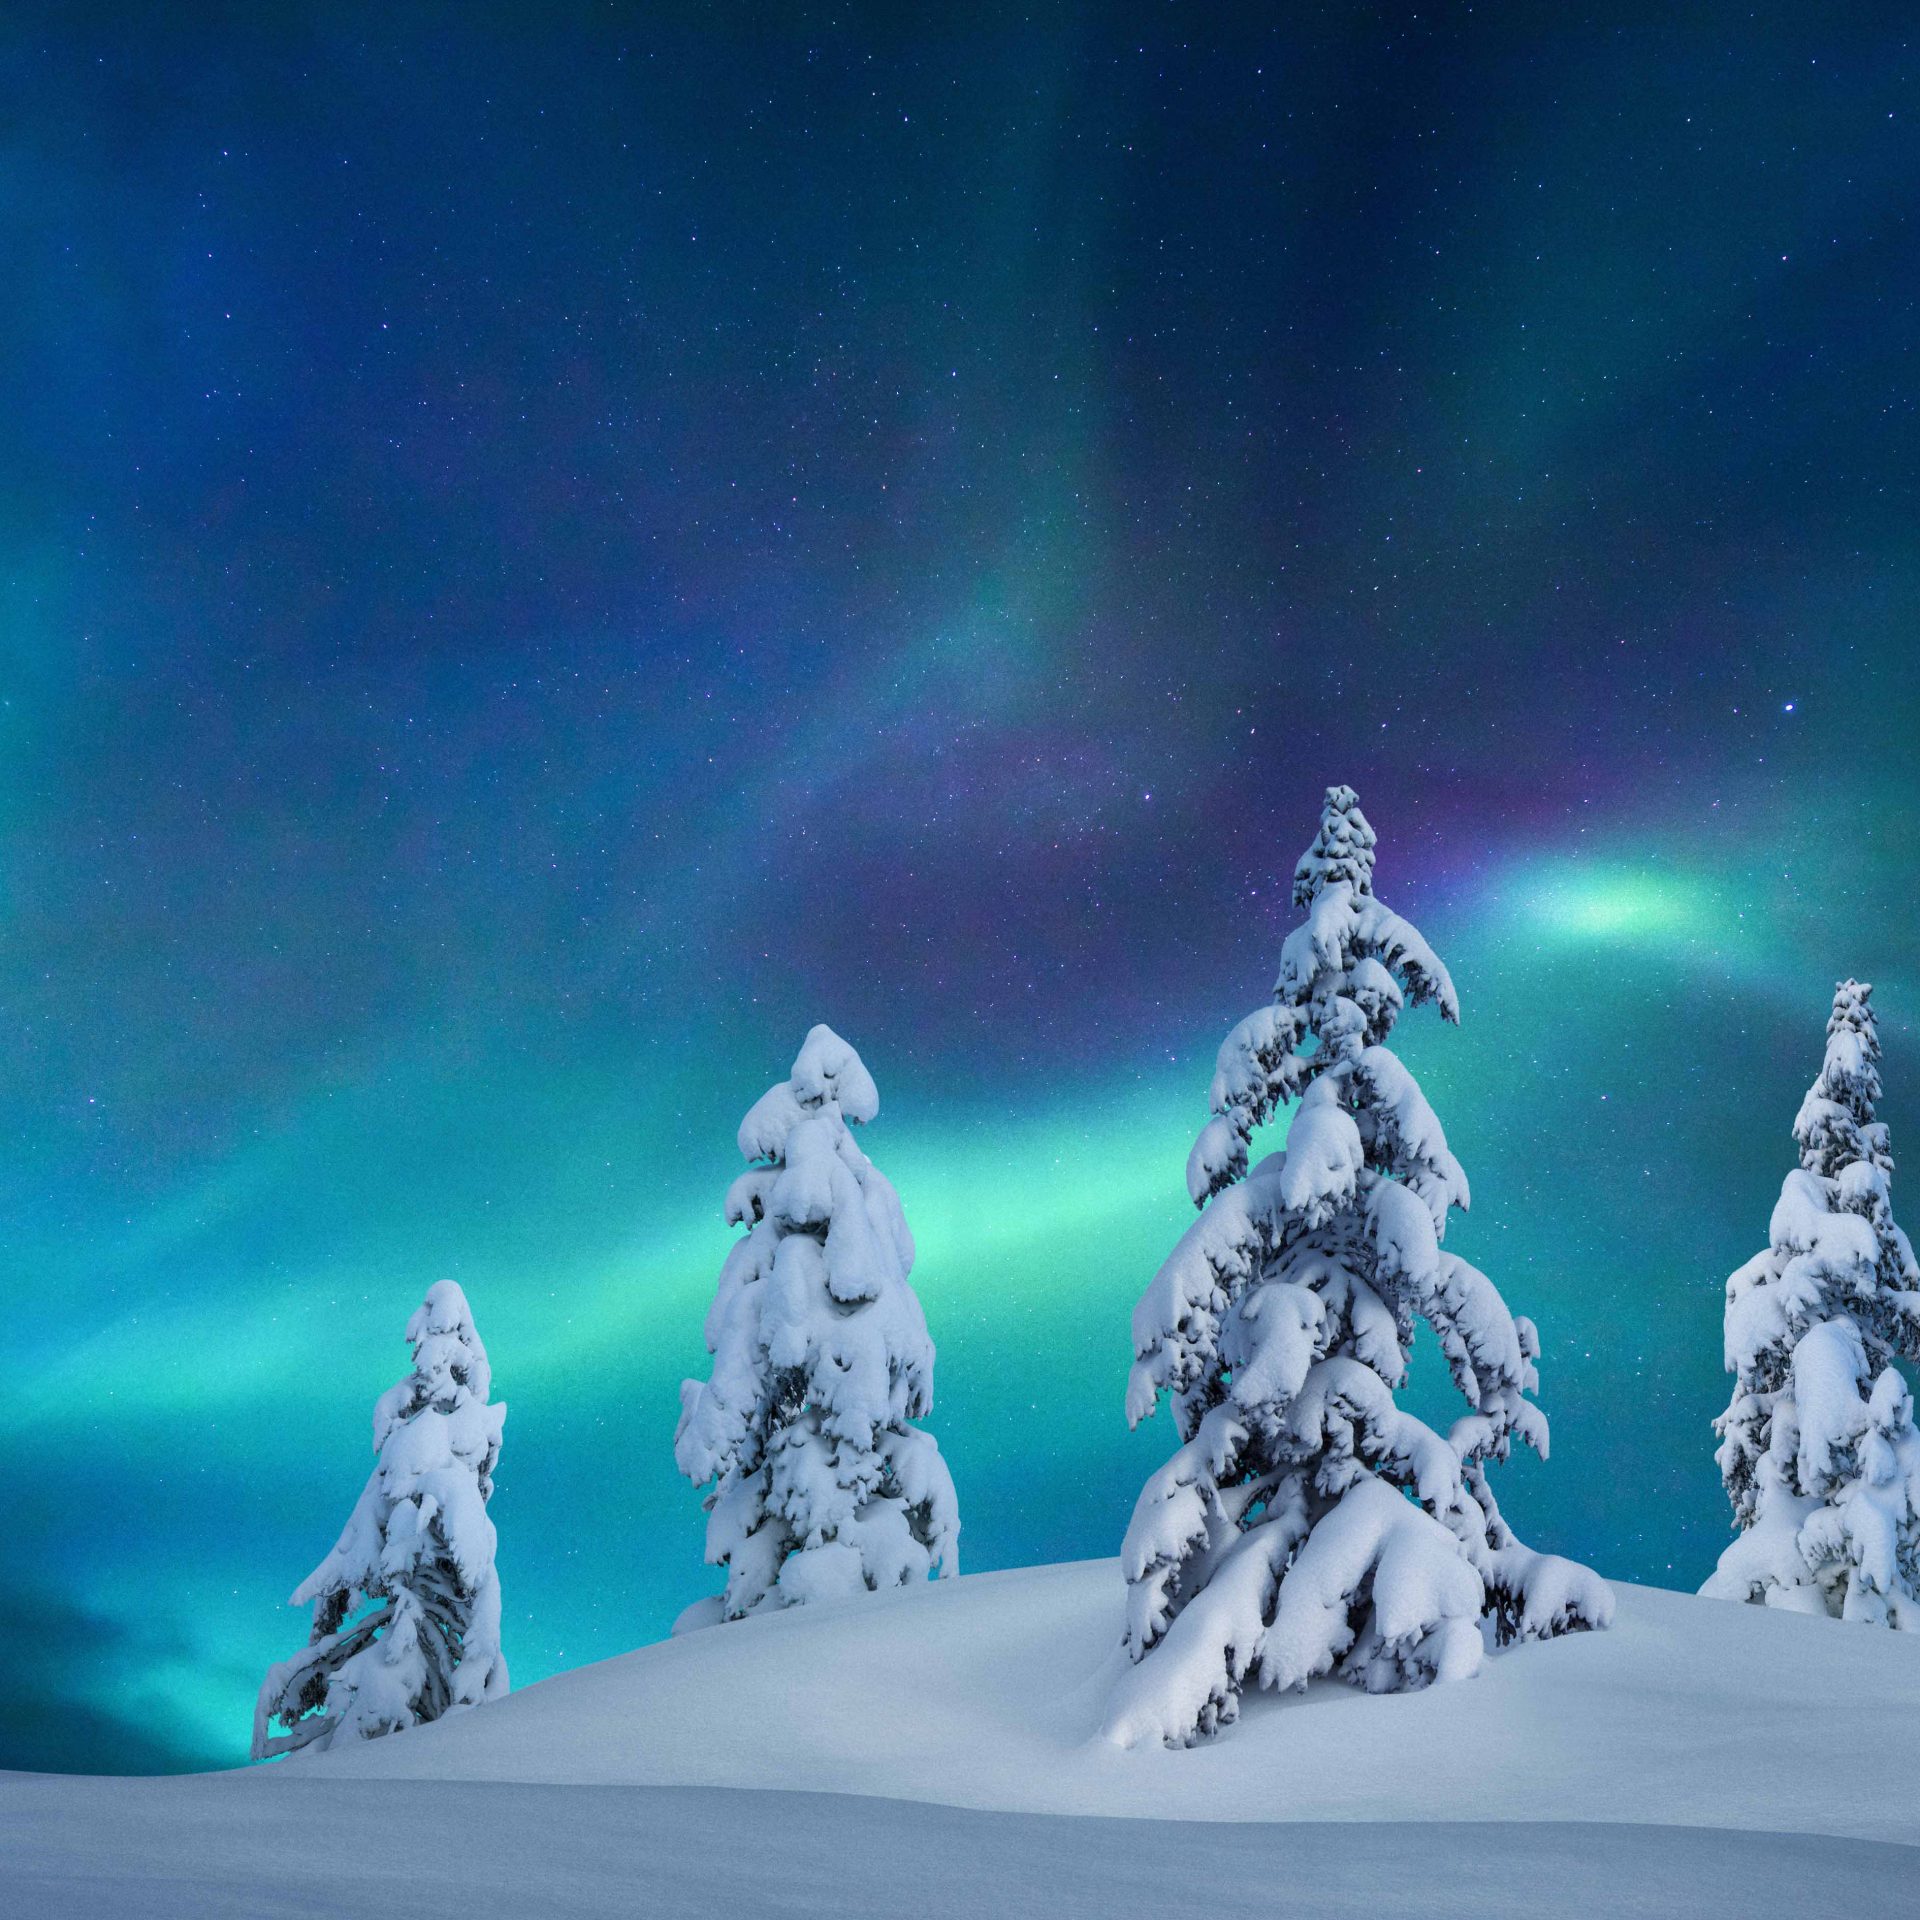 Lapland Luxury is a private Destination Management Company operating in Lapland, Finland. We are specialized in tailor-made luxury experiences with deep understanding of the delicate Arctic environment.